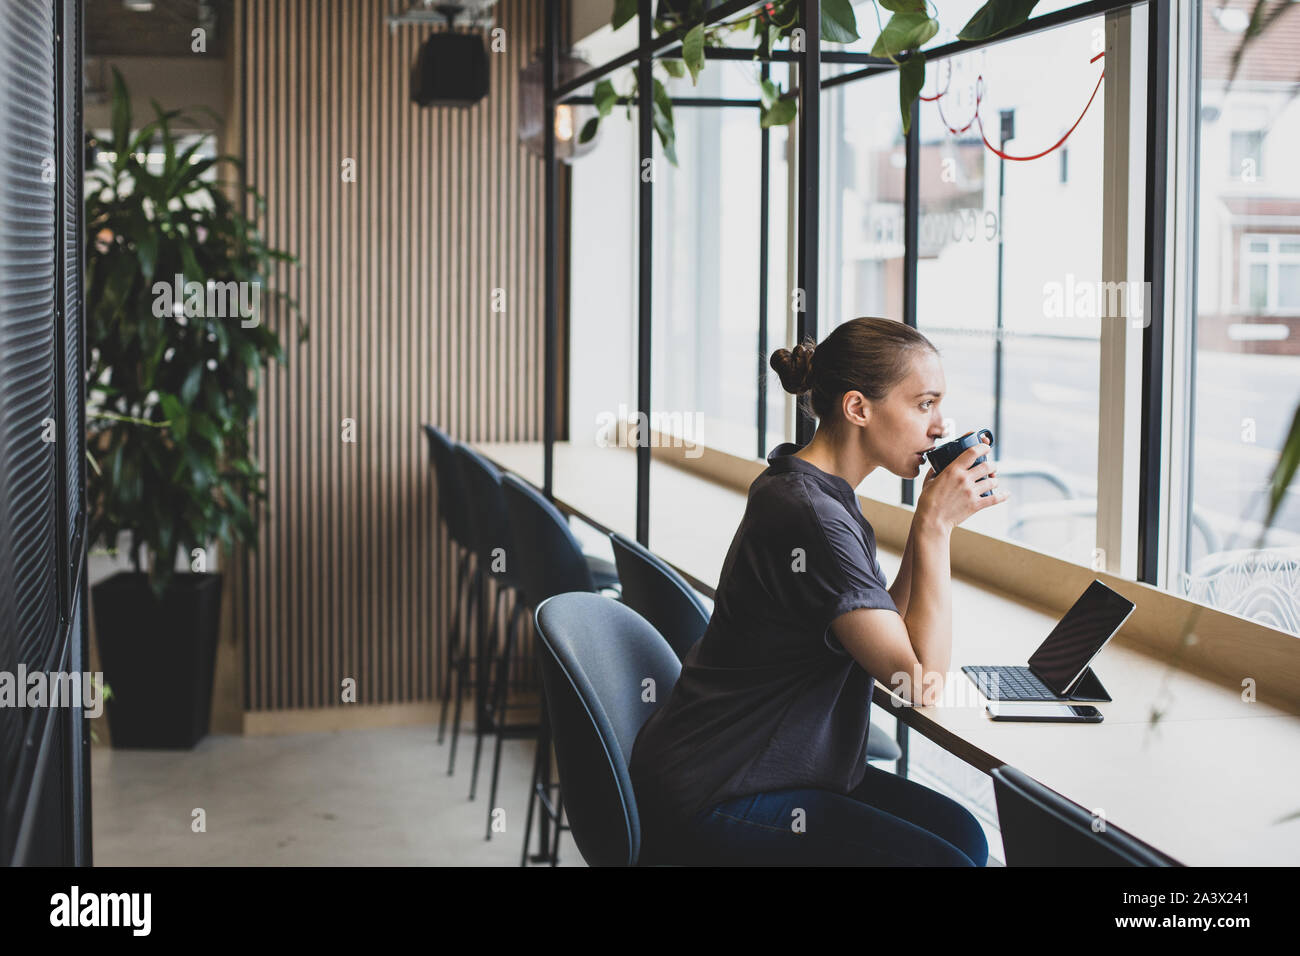 Freelance businesswoman working in a cafe Stock Photo